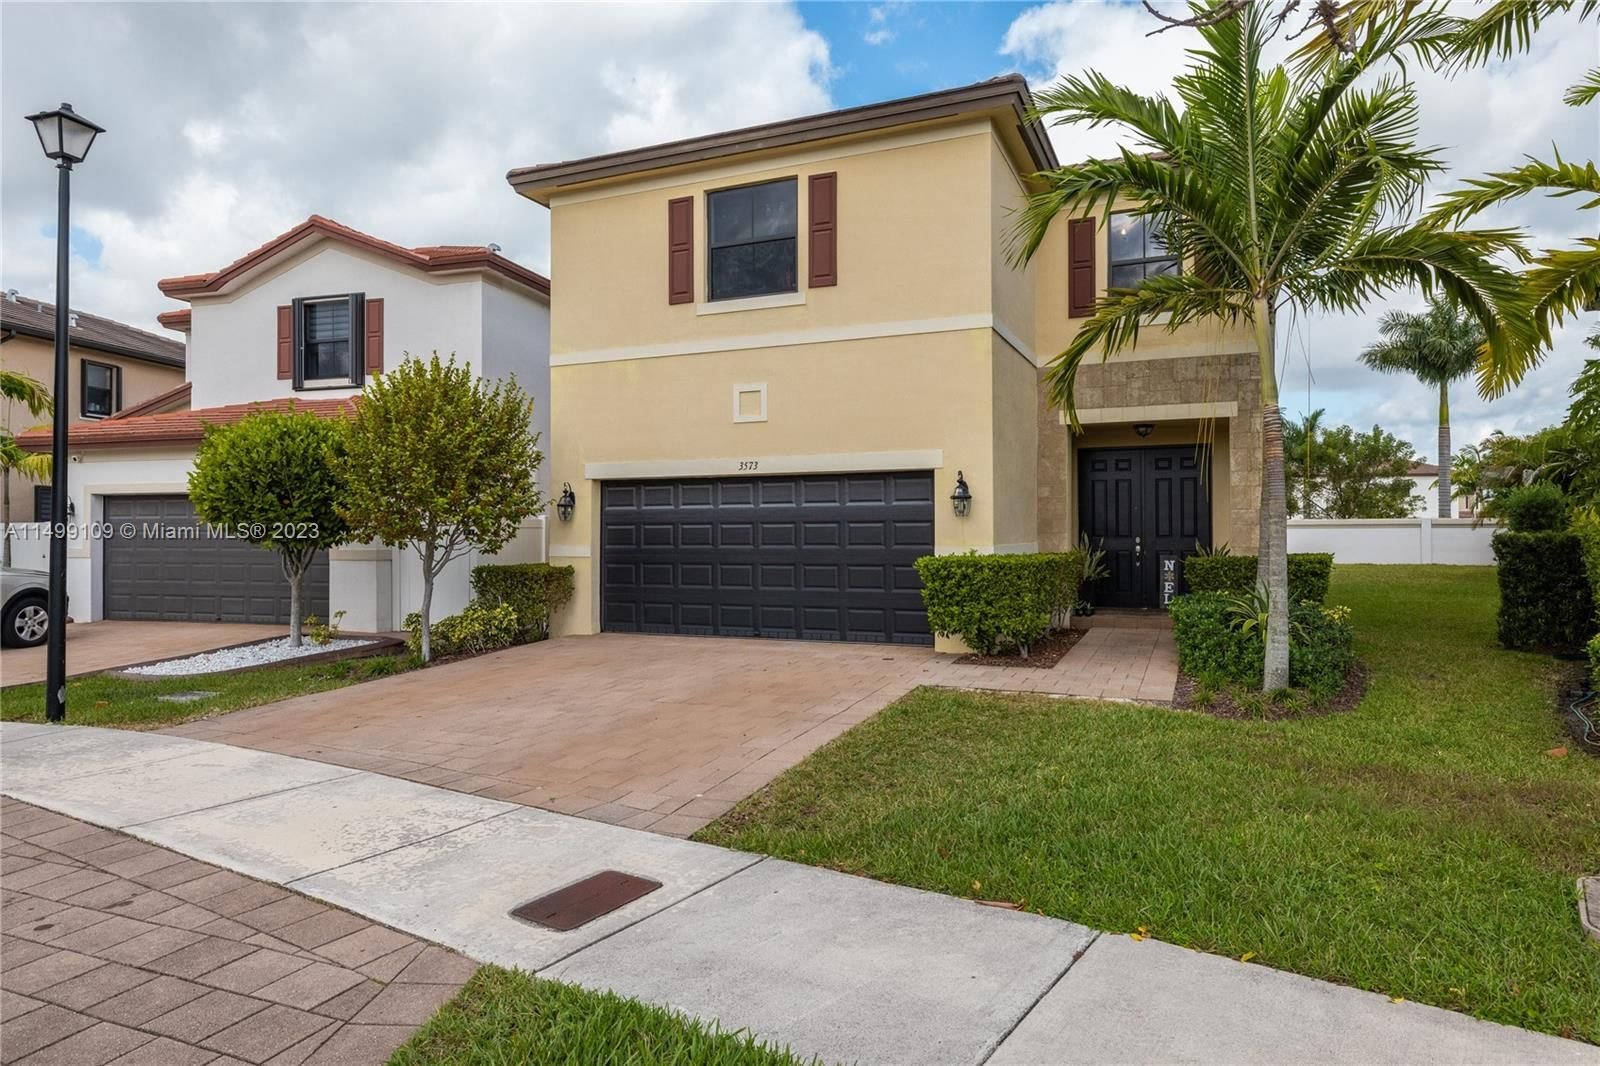 Real estate property located at 3573 106th Ter, Miami-Dade County, Aquabella Section 2, Hialeah, FL